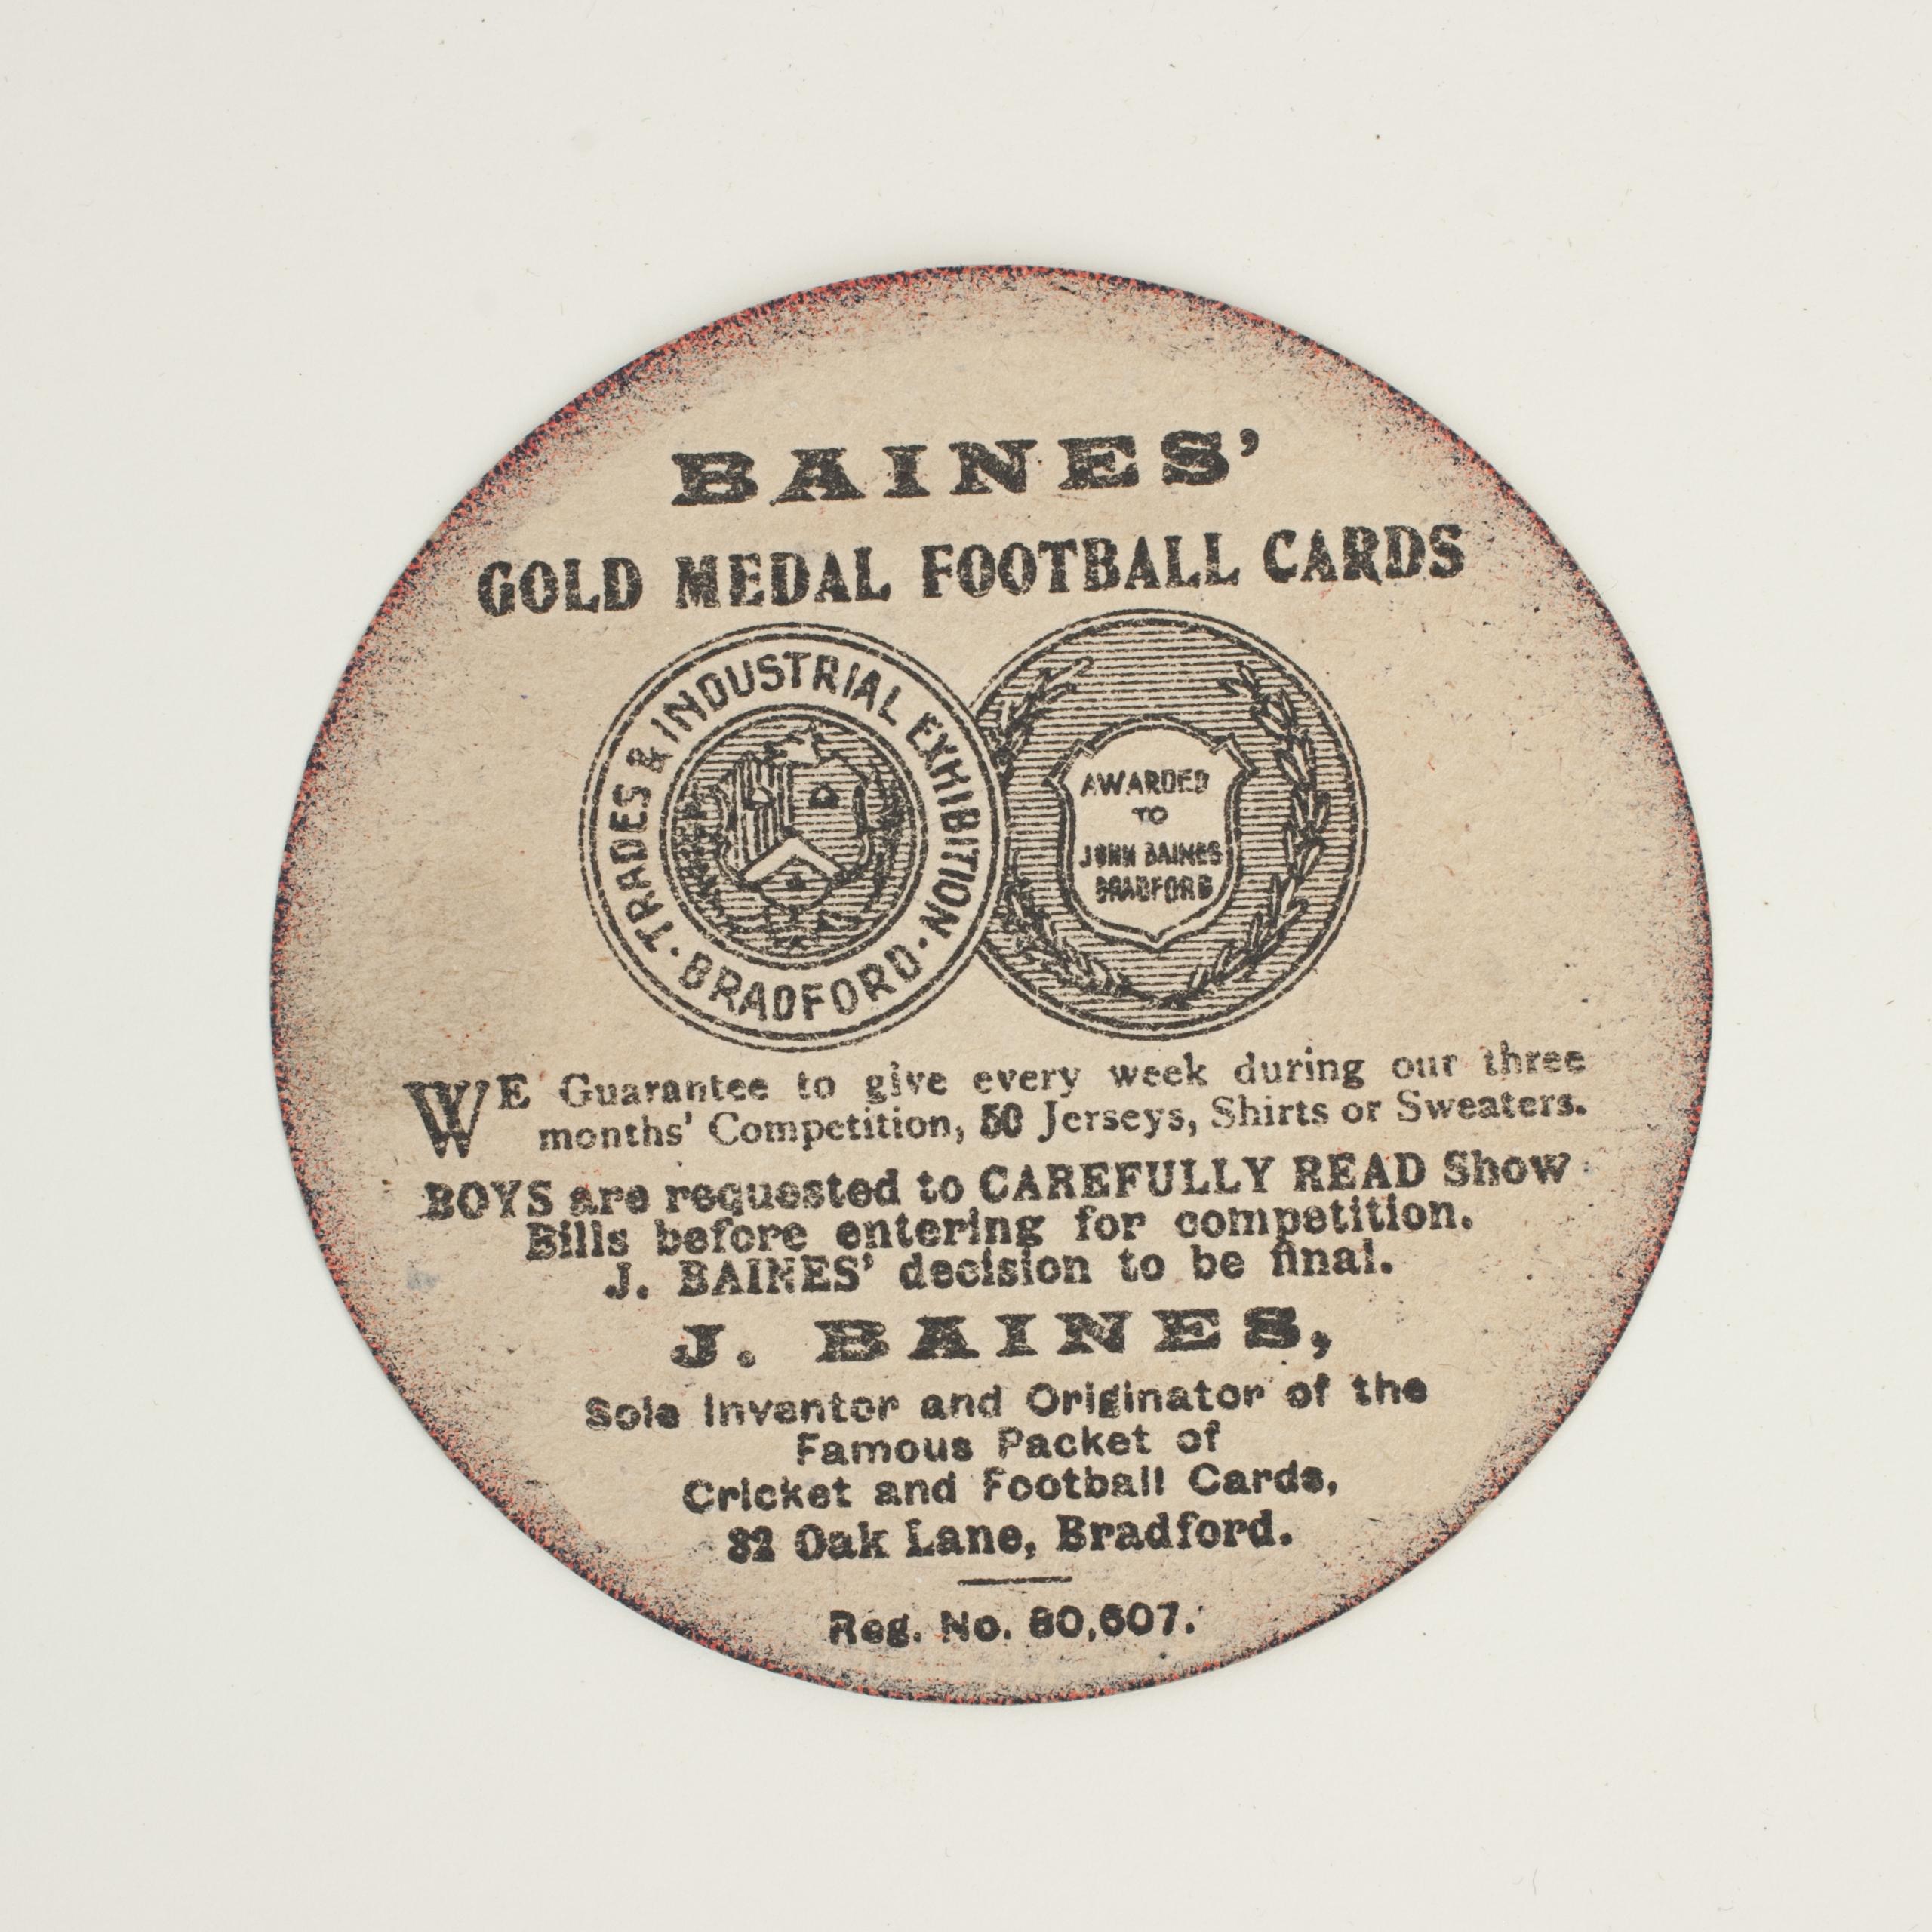 Baines football trade card, Knottingley road walk. Well played.
A rare circular football trade card in the shape of a leather football ball. Made by the toy shop owner from Bradford, John Baines. Baines went on to produce not only football cards